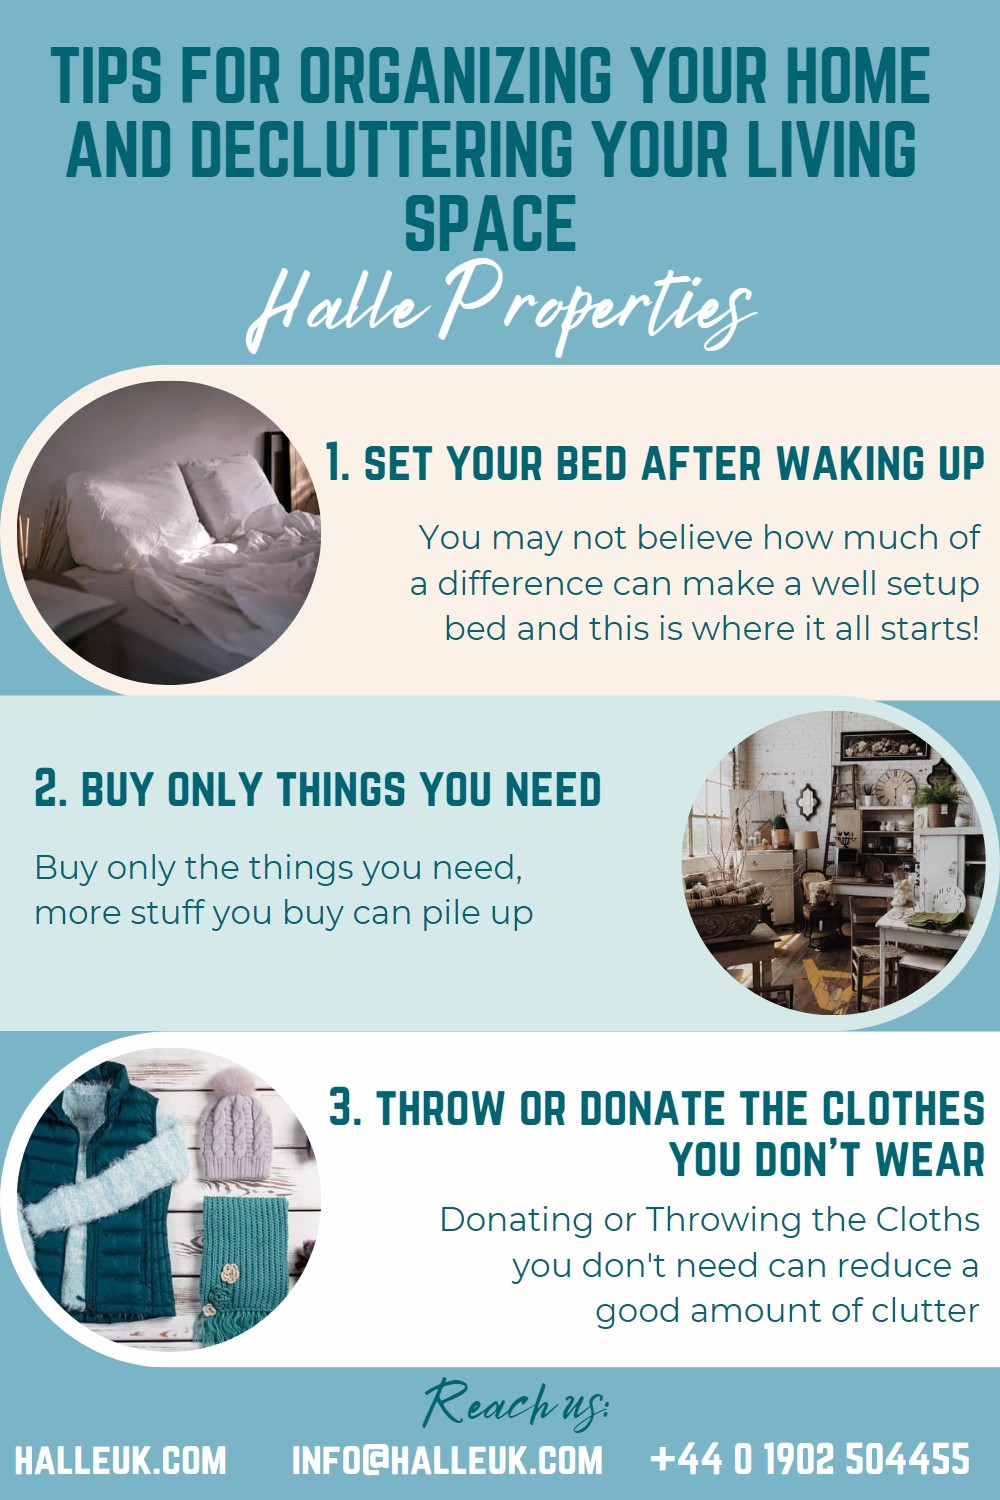 Tips for Organizing Your Home and Decluttering Your Living Space